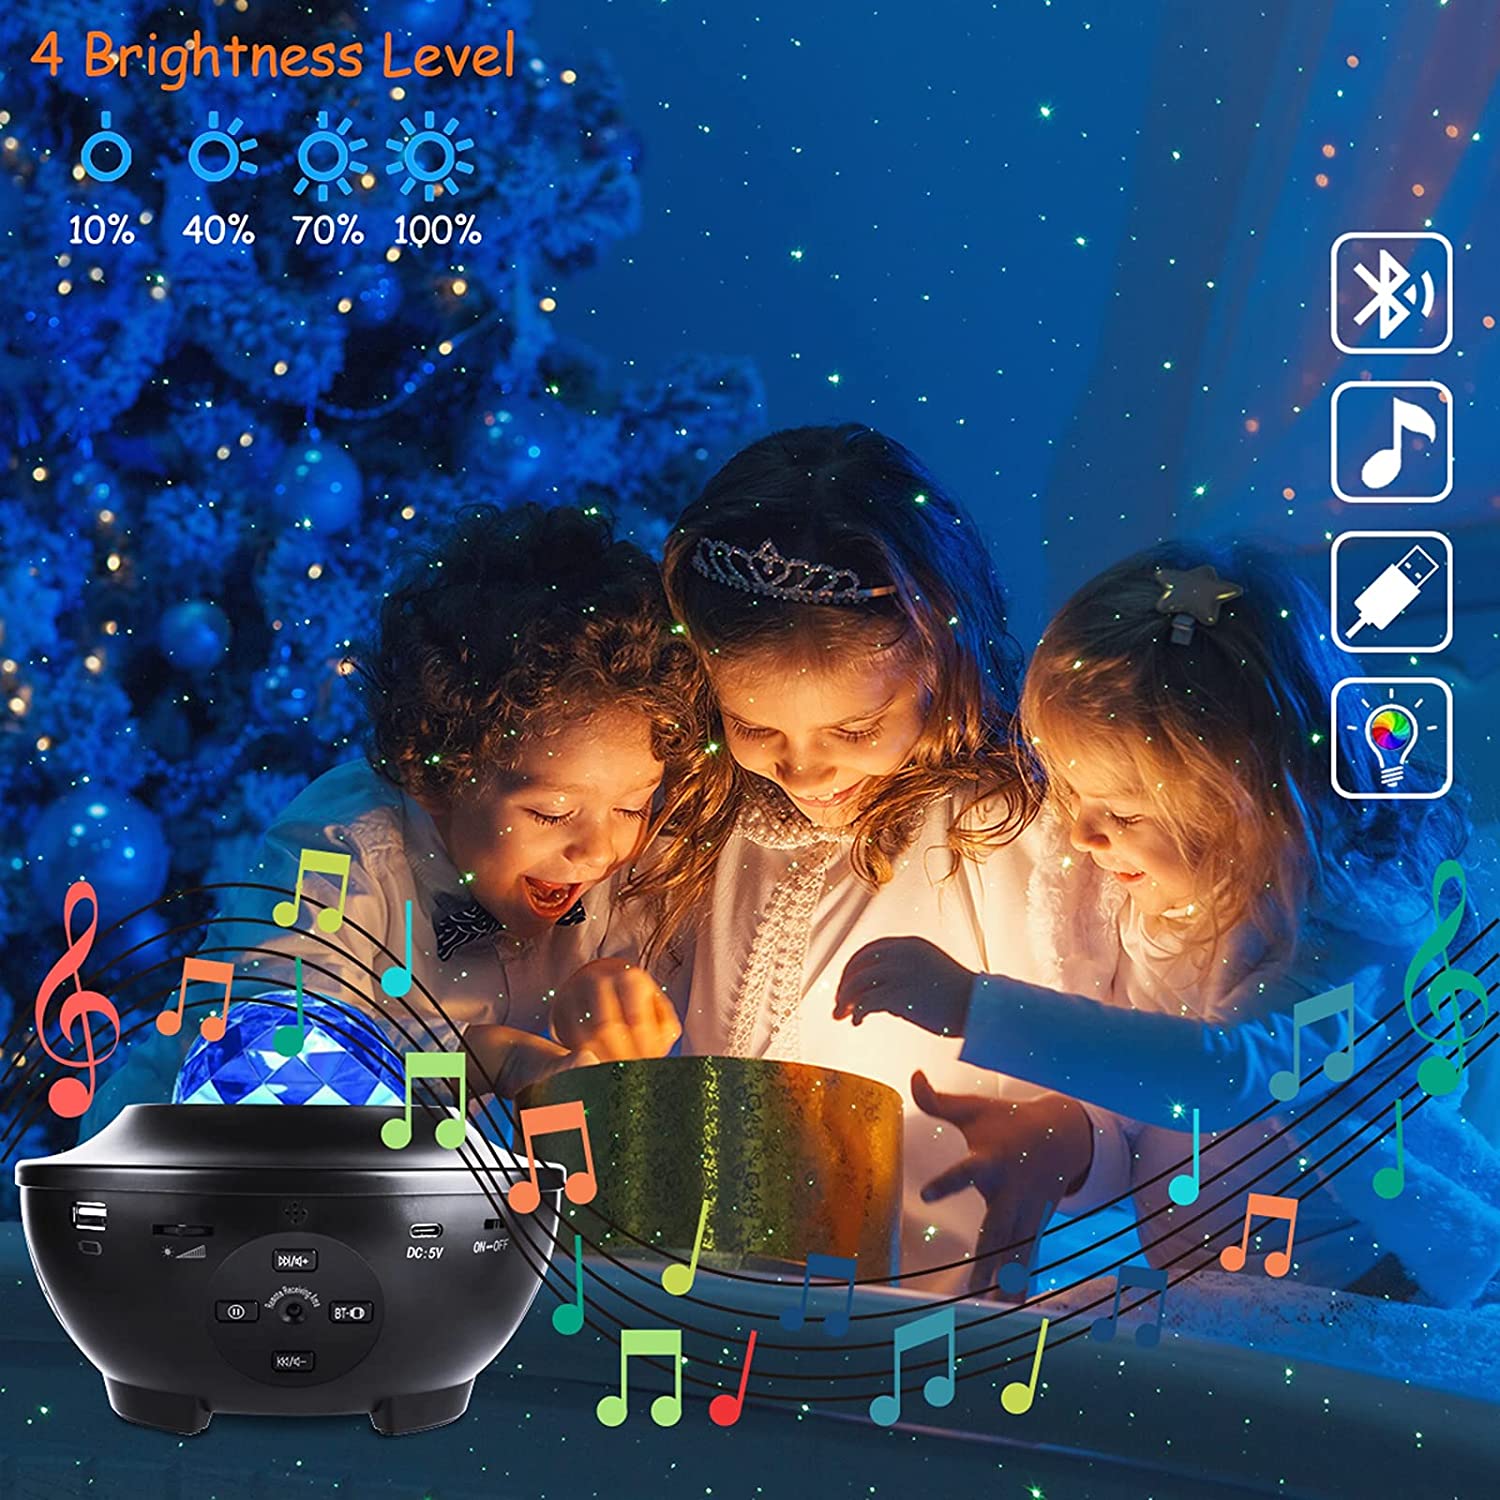 Star Projector Night Light, 2-in-1 Ocean Wave LED Starry Night Light Projector Built-in Bluetooth Speaker Sound Sensor for Baby Children’s Bedroom, Home Decoration, Game Rooms